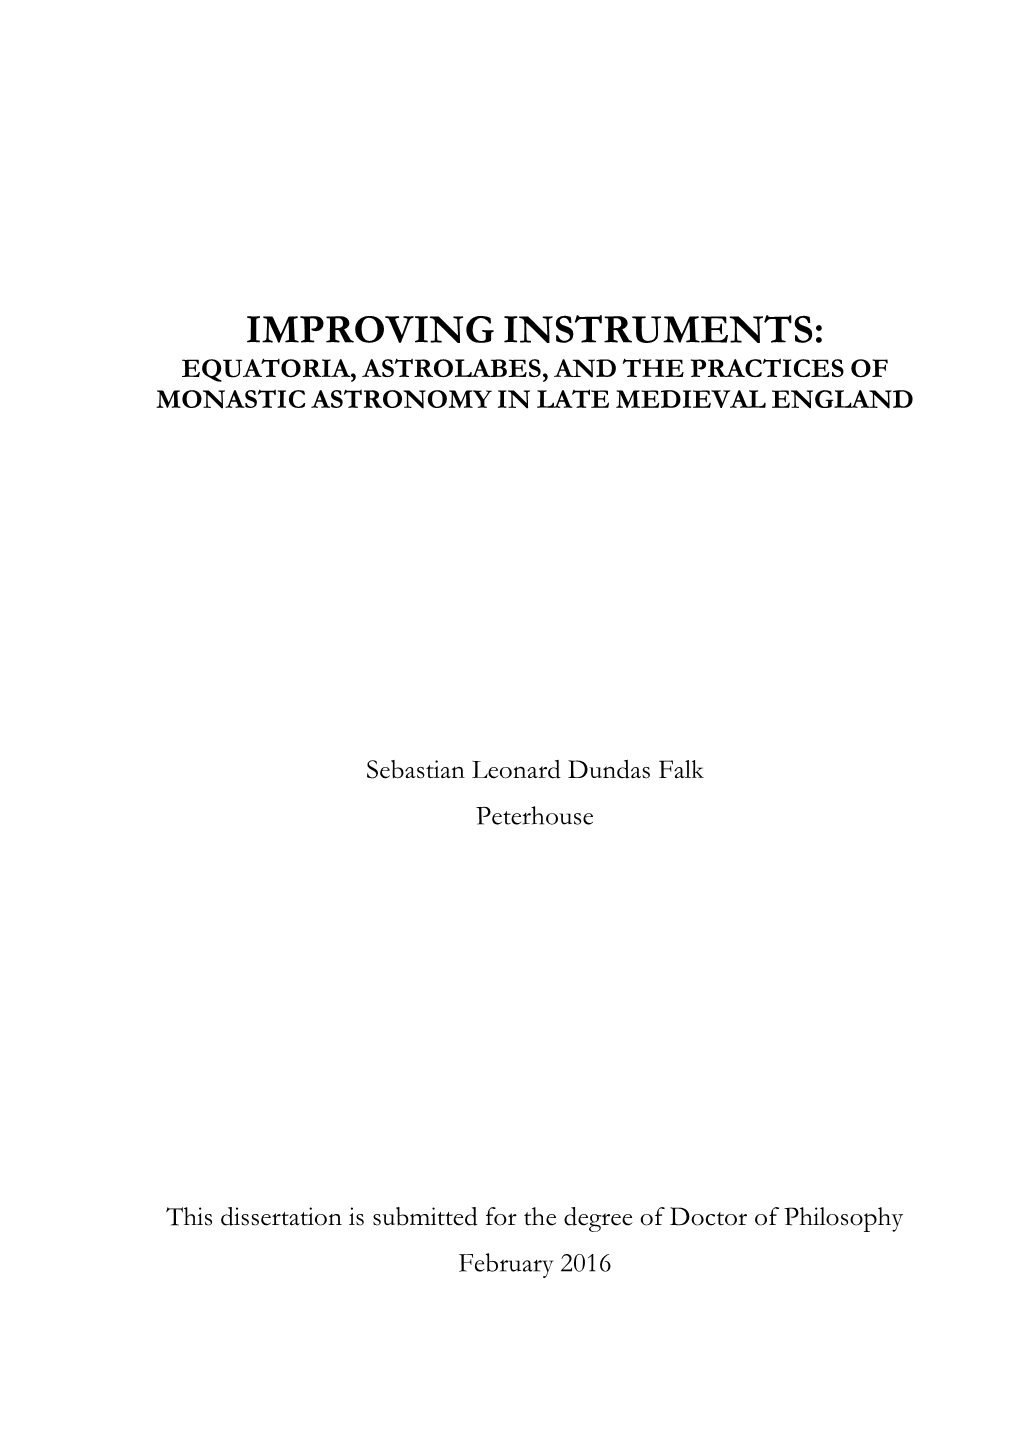 Improving Instruments: Equatoria, Astrolabes, and the Practices of Monastic Astronomy in Late Medieval England